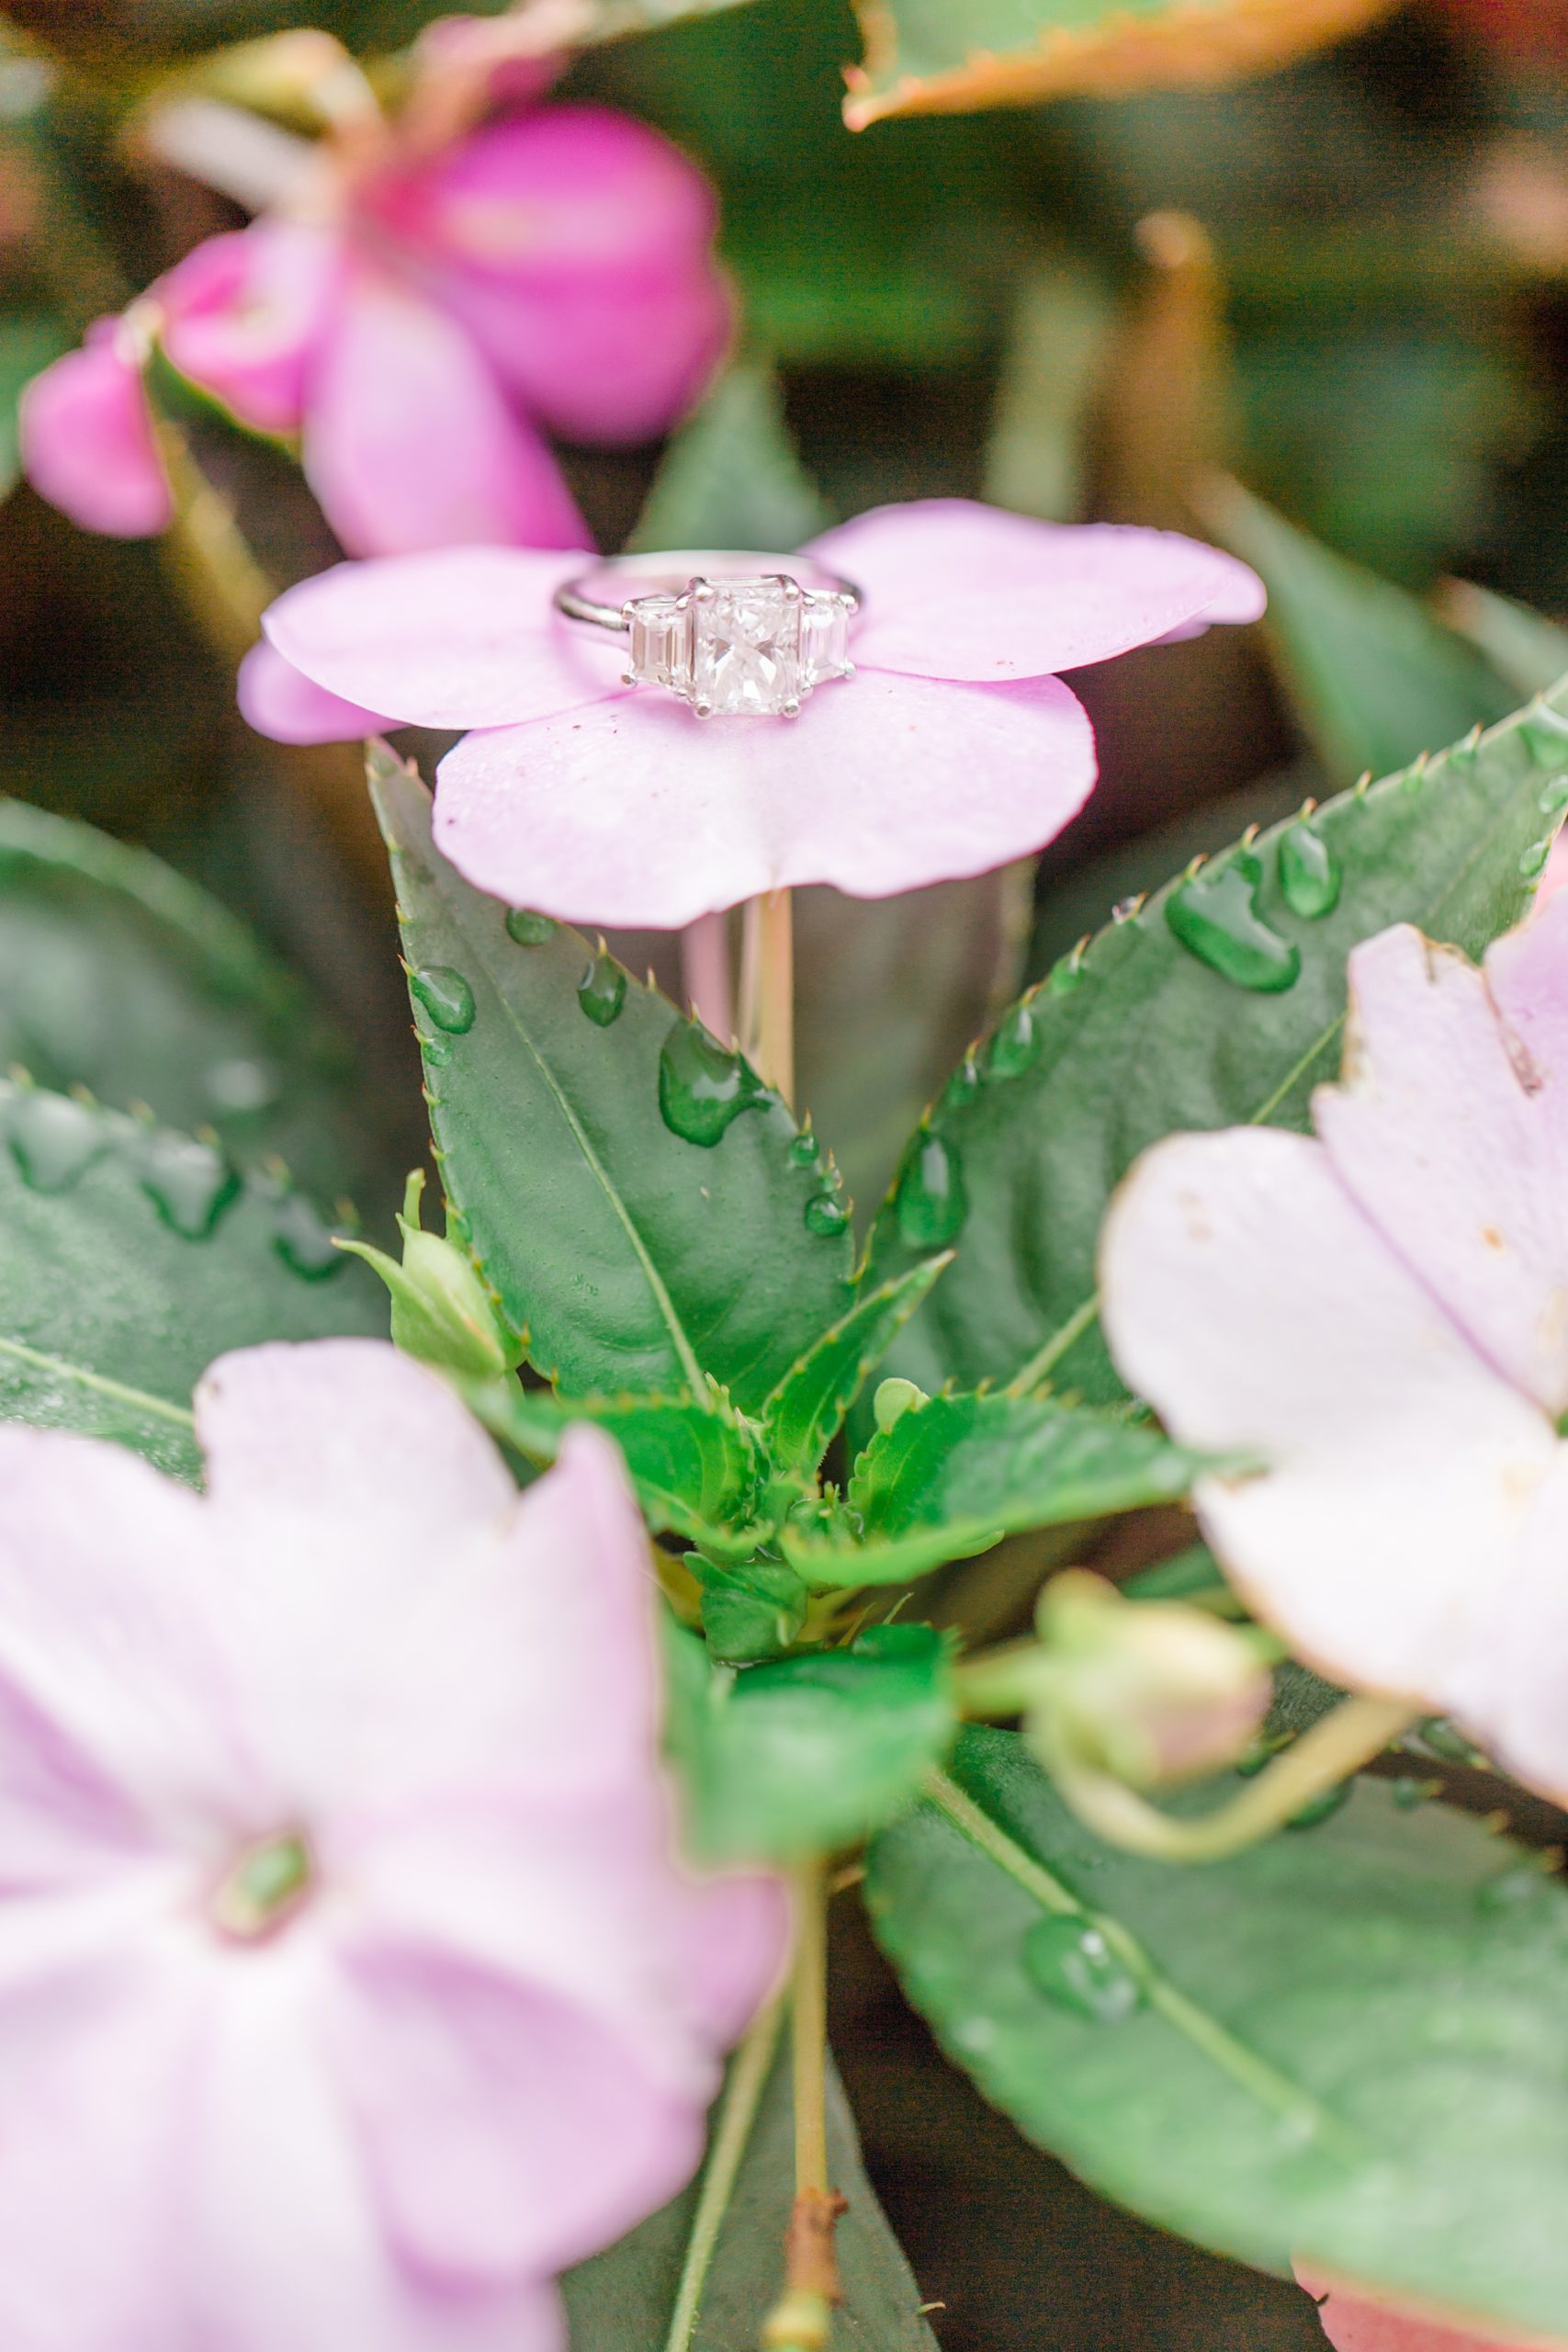 engagement ring rests on pink flower with water droplets at Dallas Arboretum